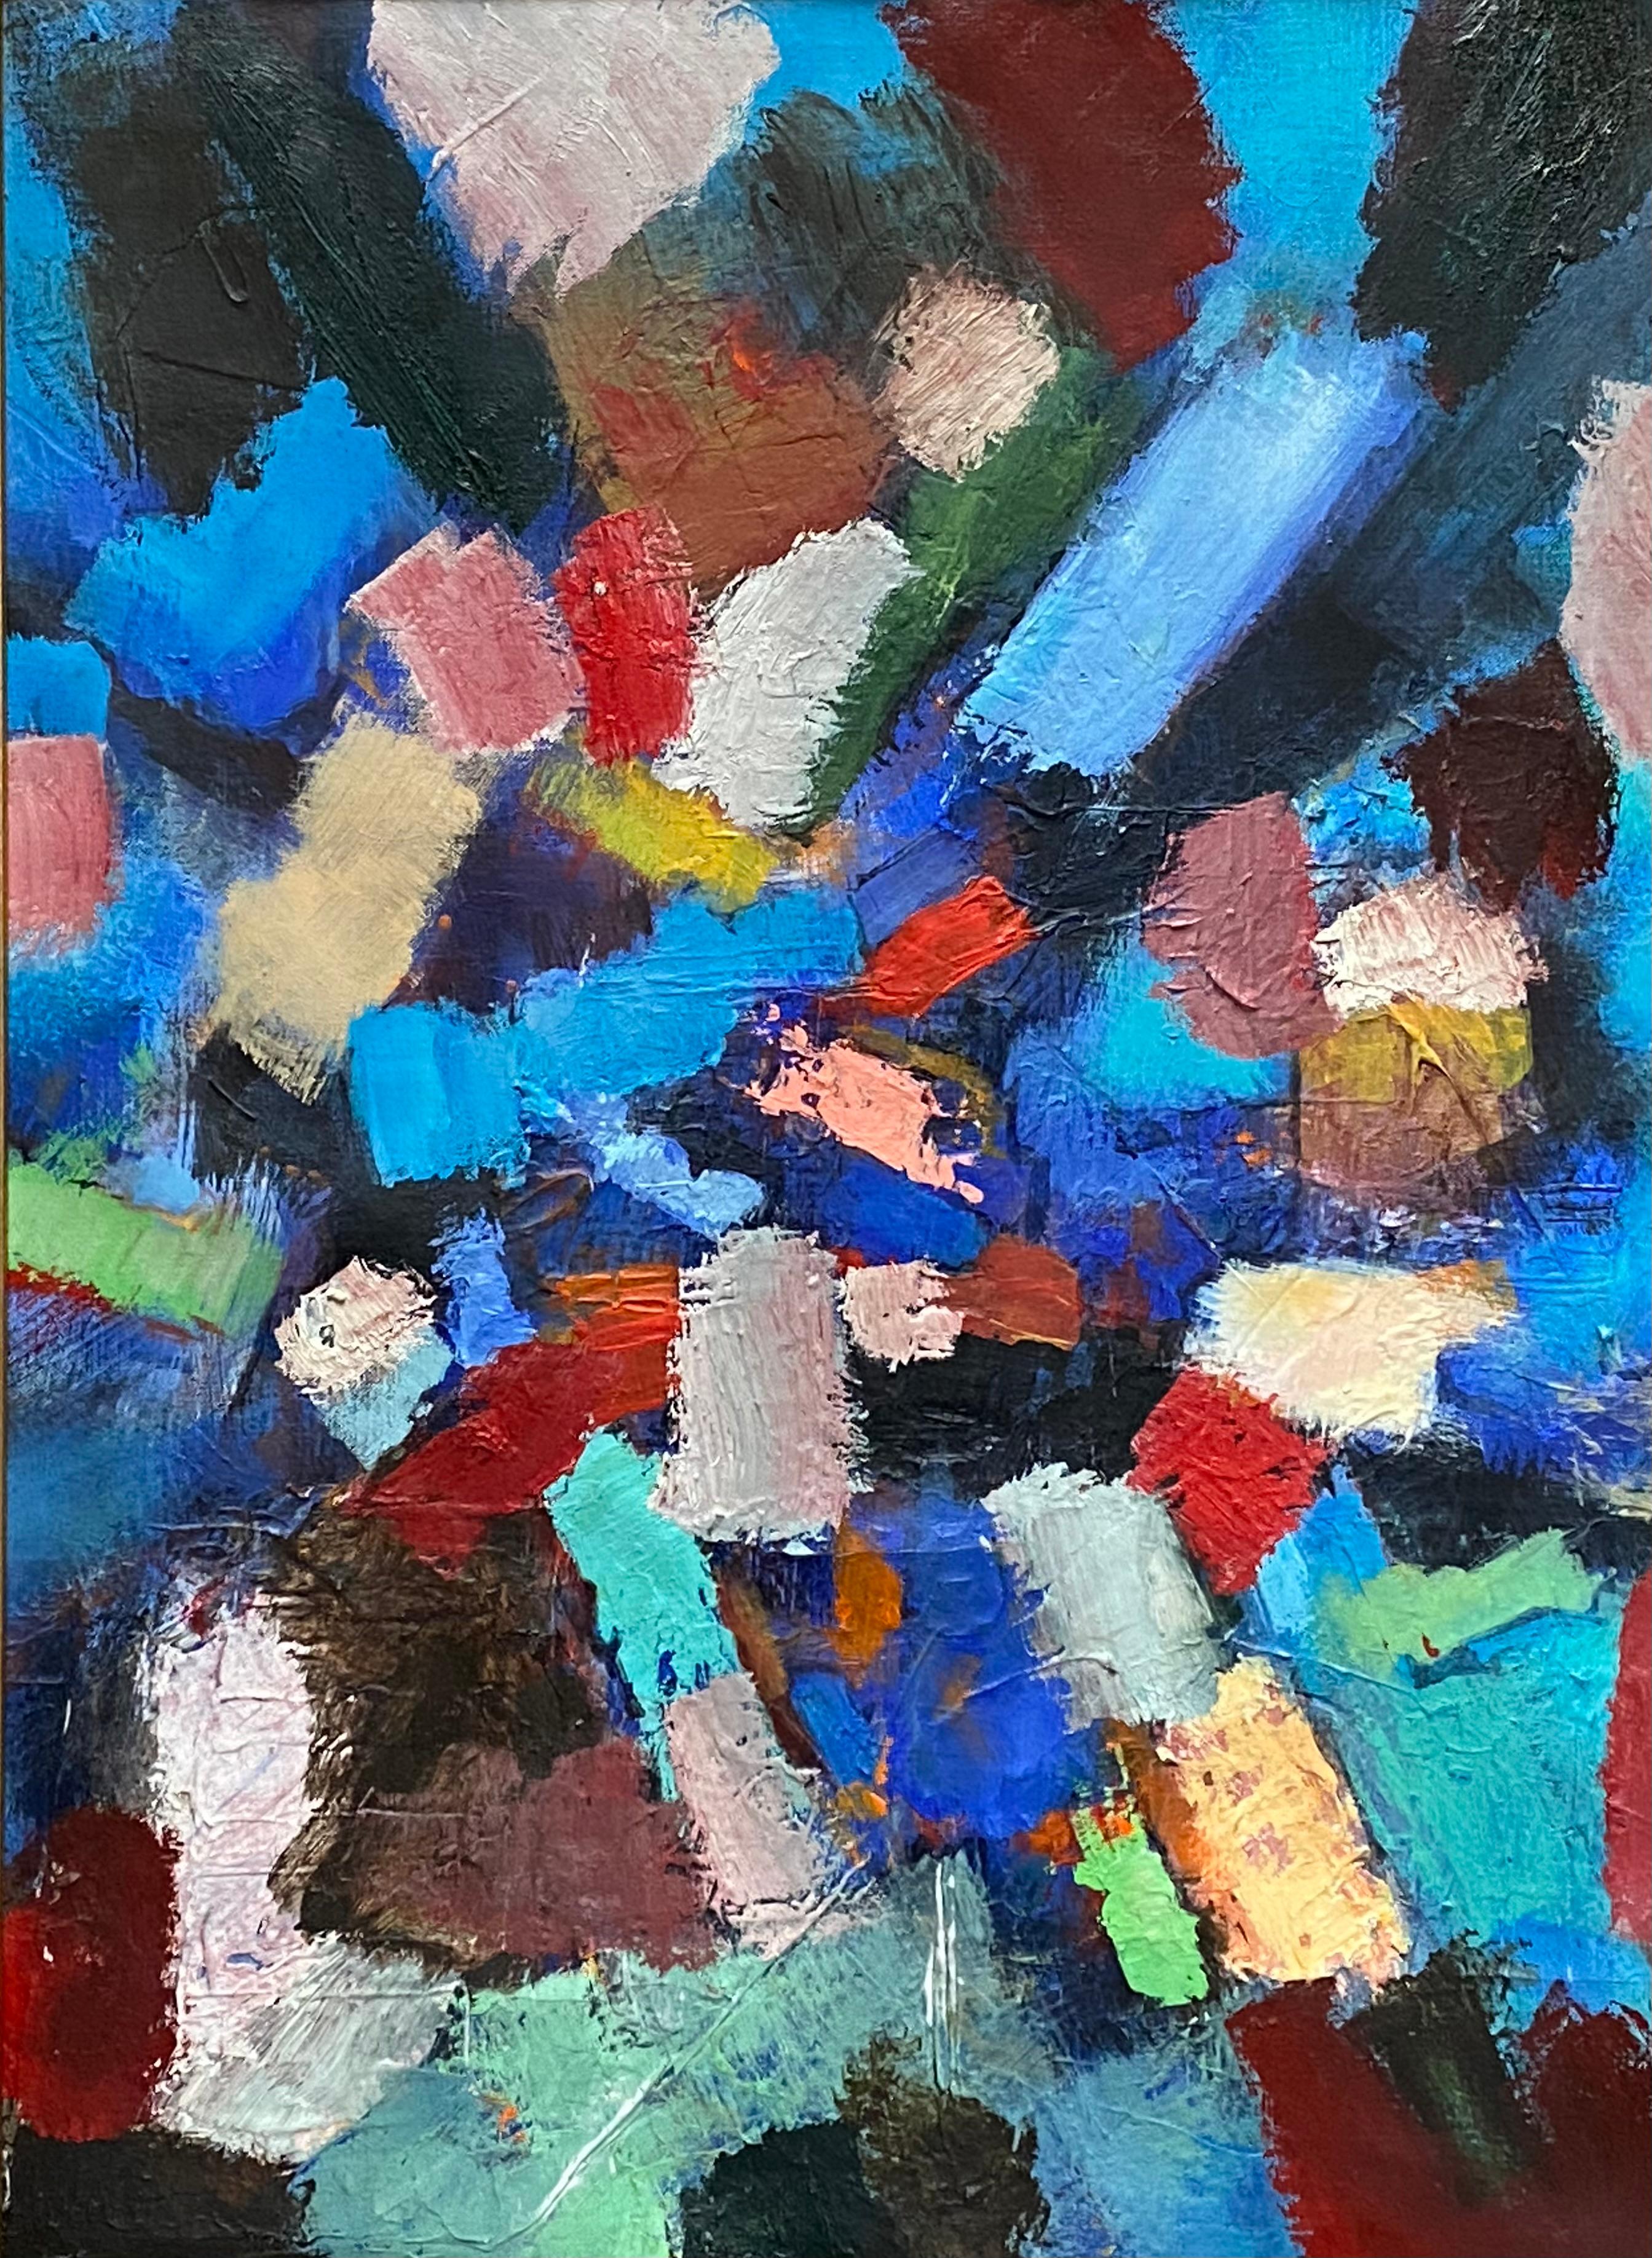 “Untitled” - Abstract Expressionist Painting by John Little